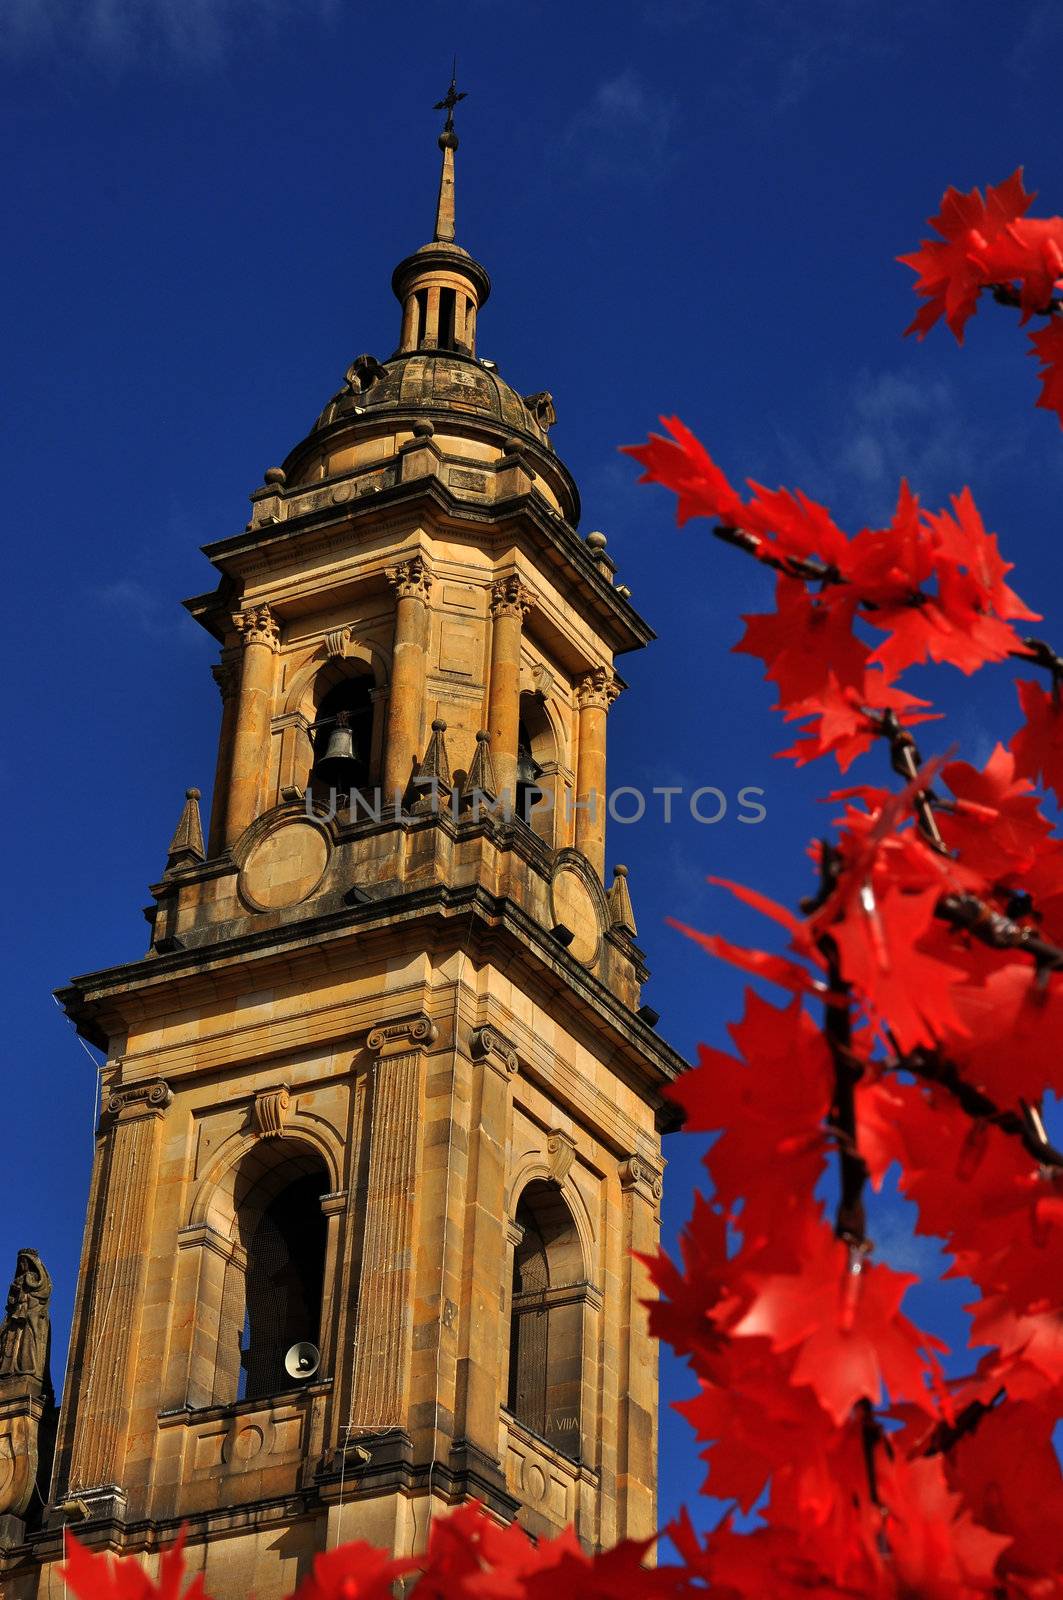 
Spire of cathedral with Christmas decorations in Bogota, Colombia